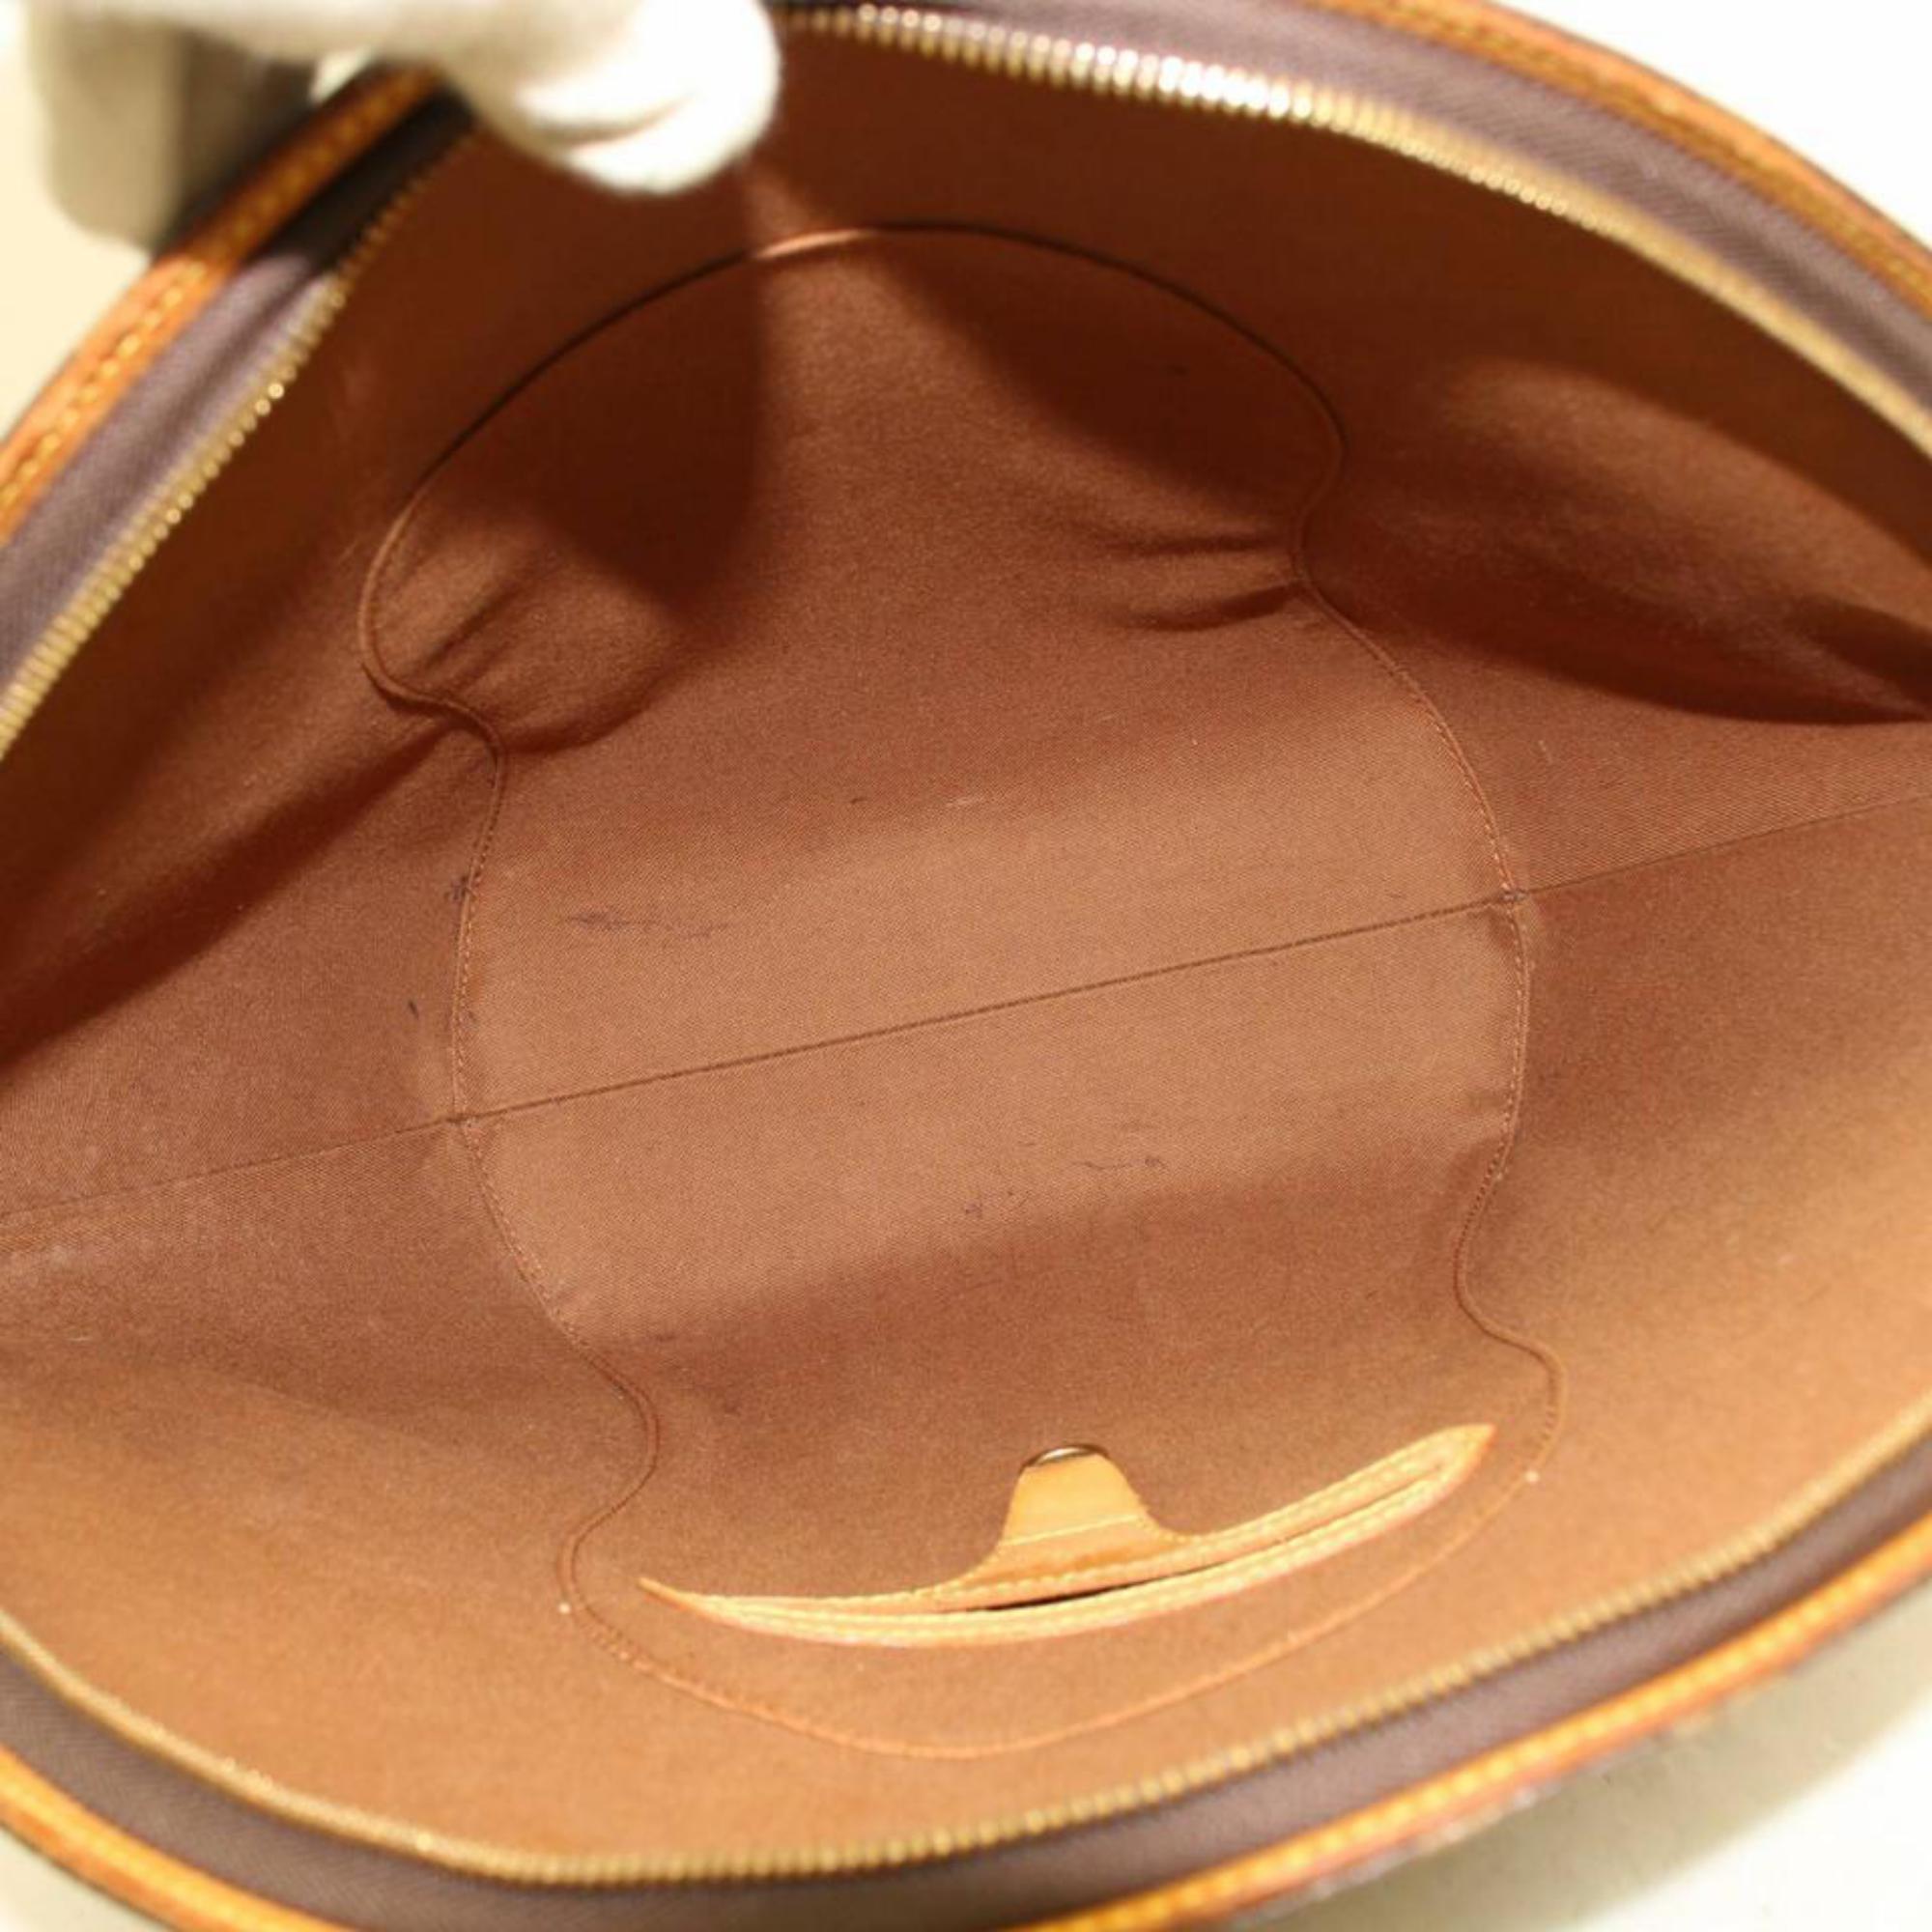 Louis Vuitton Ellipse (Ultra Rare) Gm 866913 Brown Coated Canvas Shoulder Bag In Good Condition For Sale In Forest Hills, NY